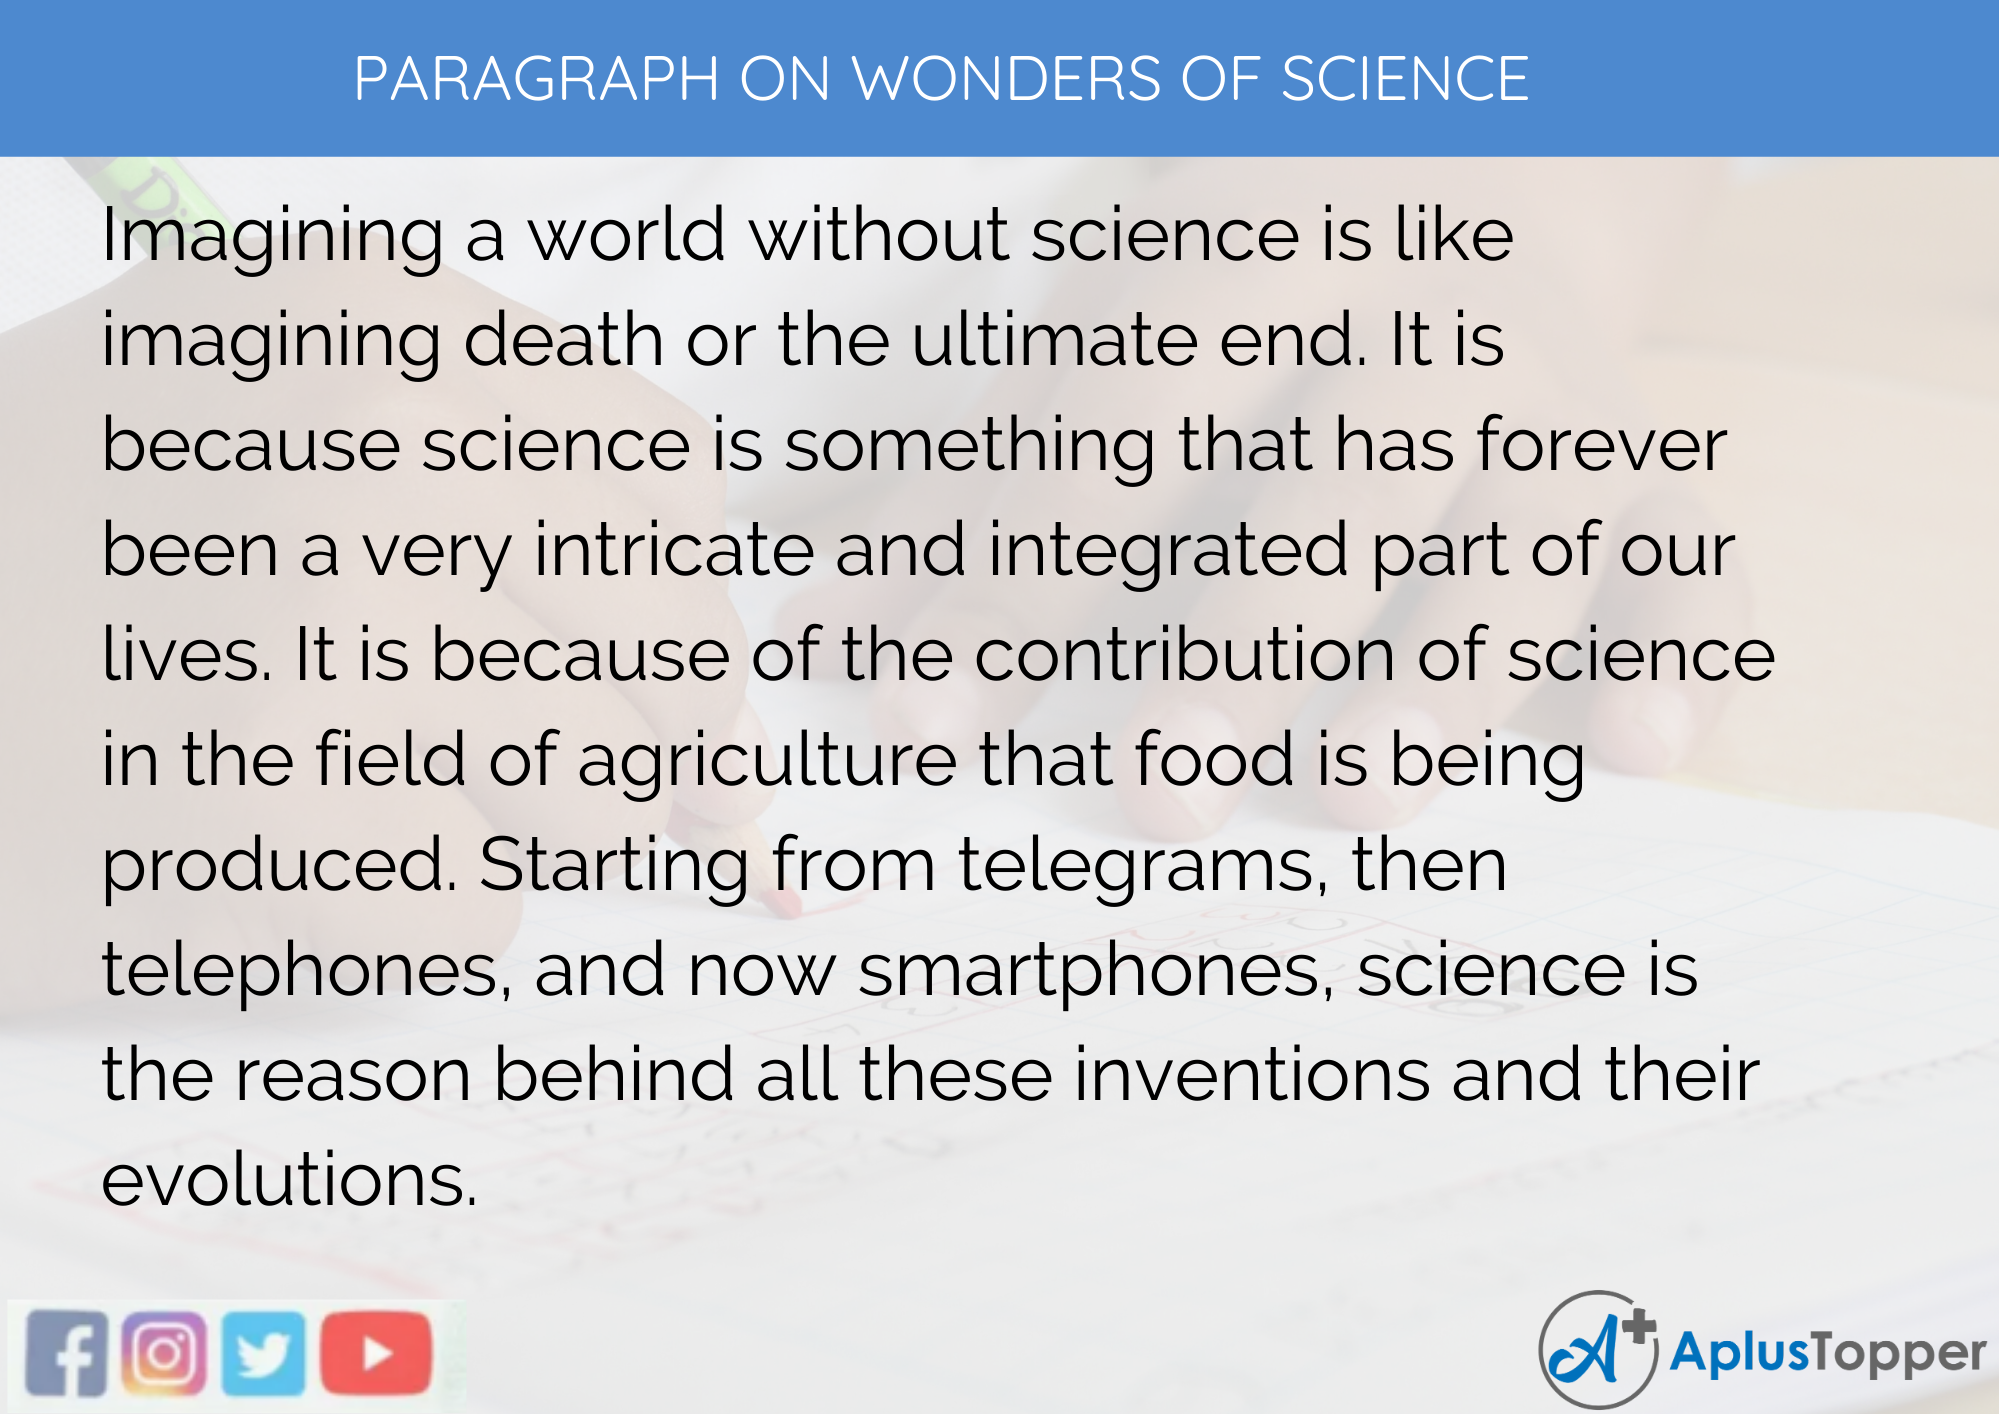 Paragraph On Wonders Of Science For Classes 9, 10, 11, 12 And Competitive Exams Students